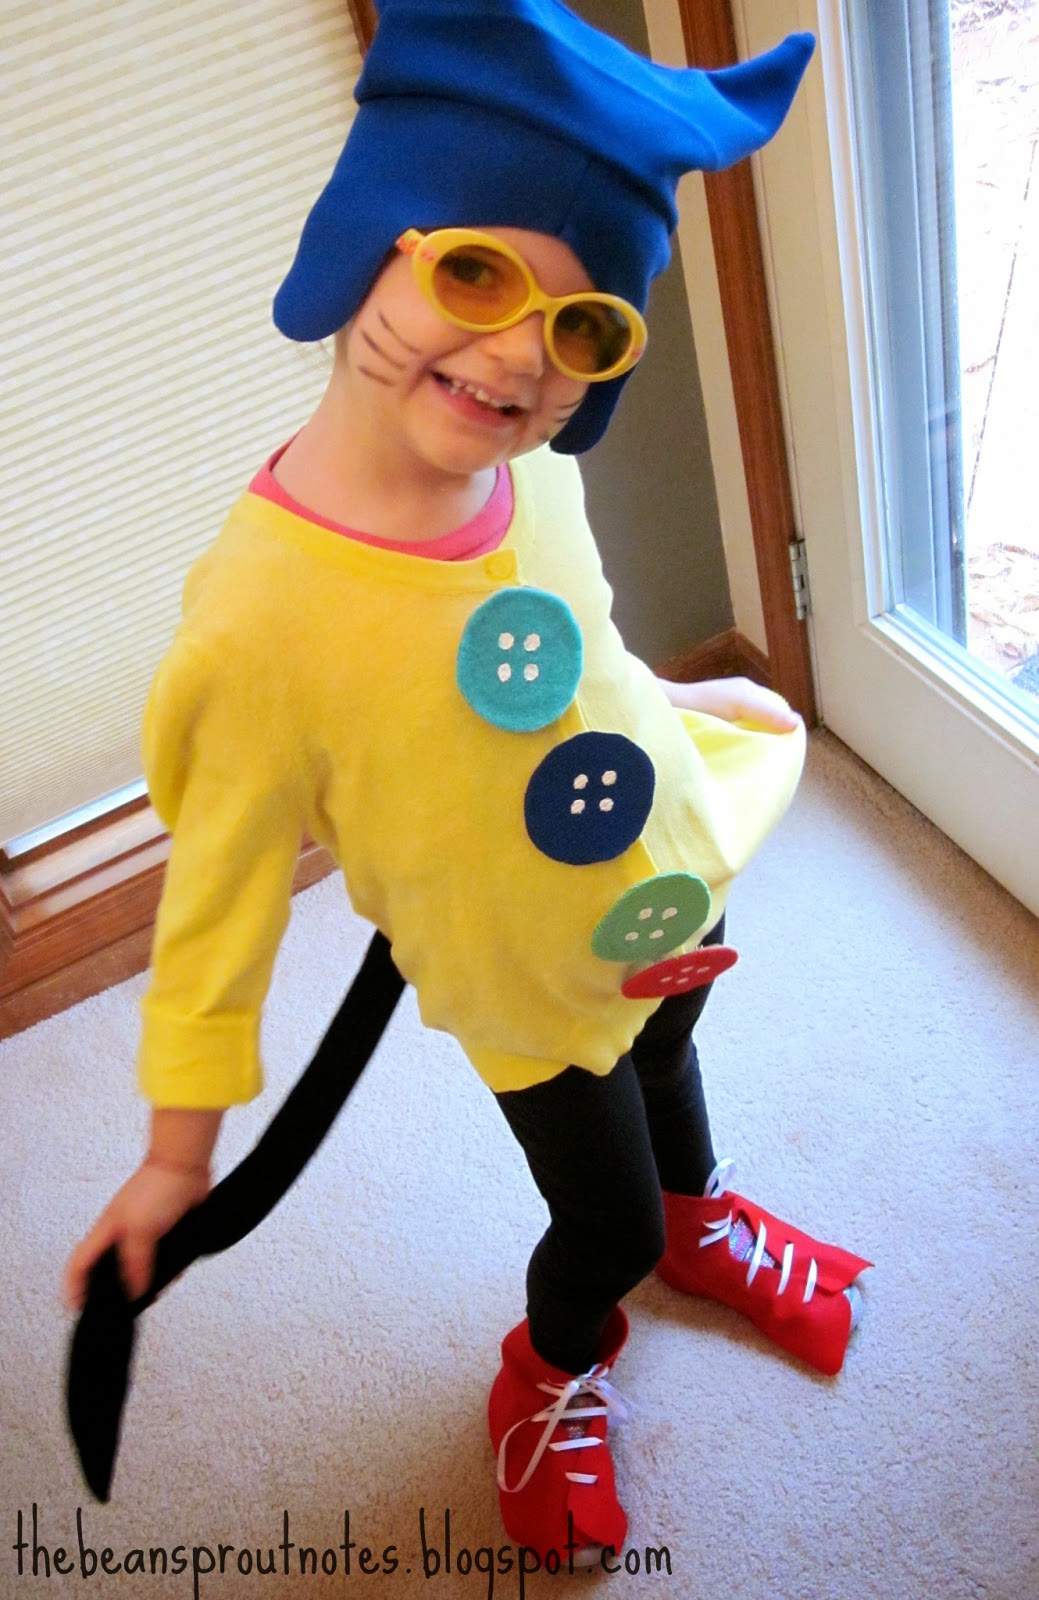 The Bean Sprout Notes: Pete the Cat Four Groovy Buttons Costume